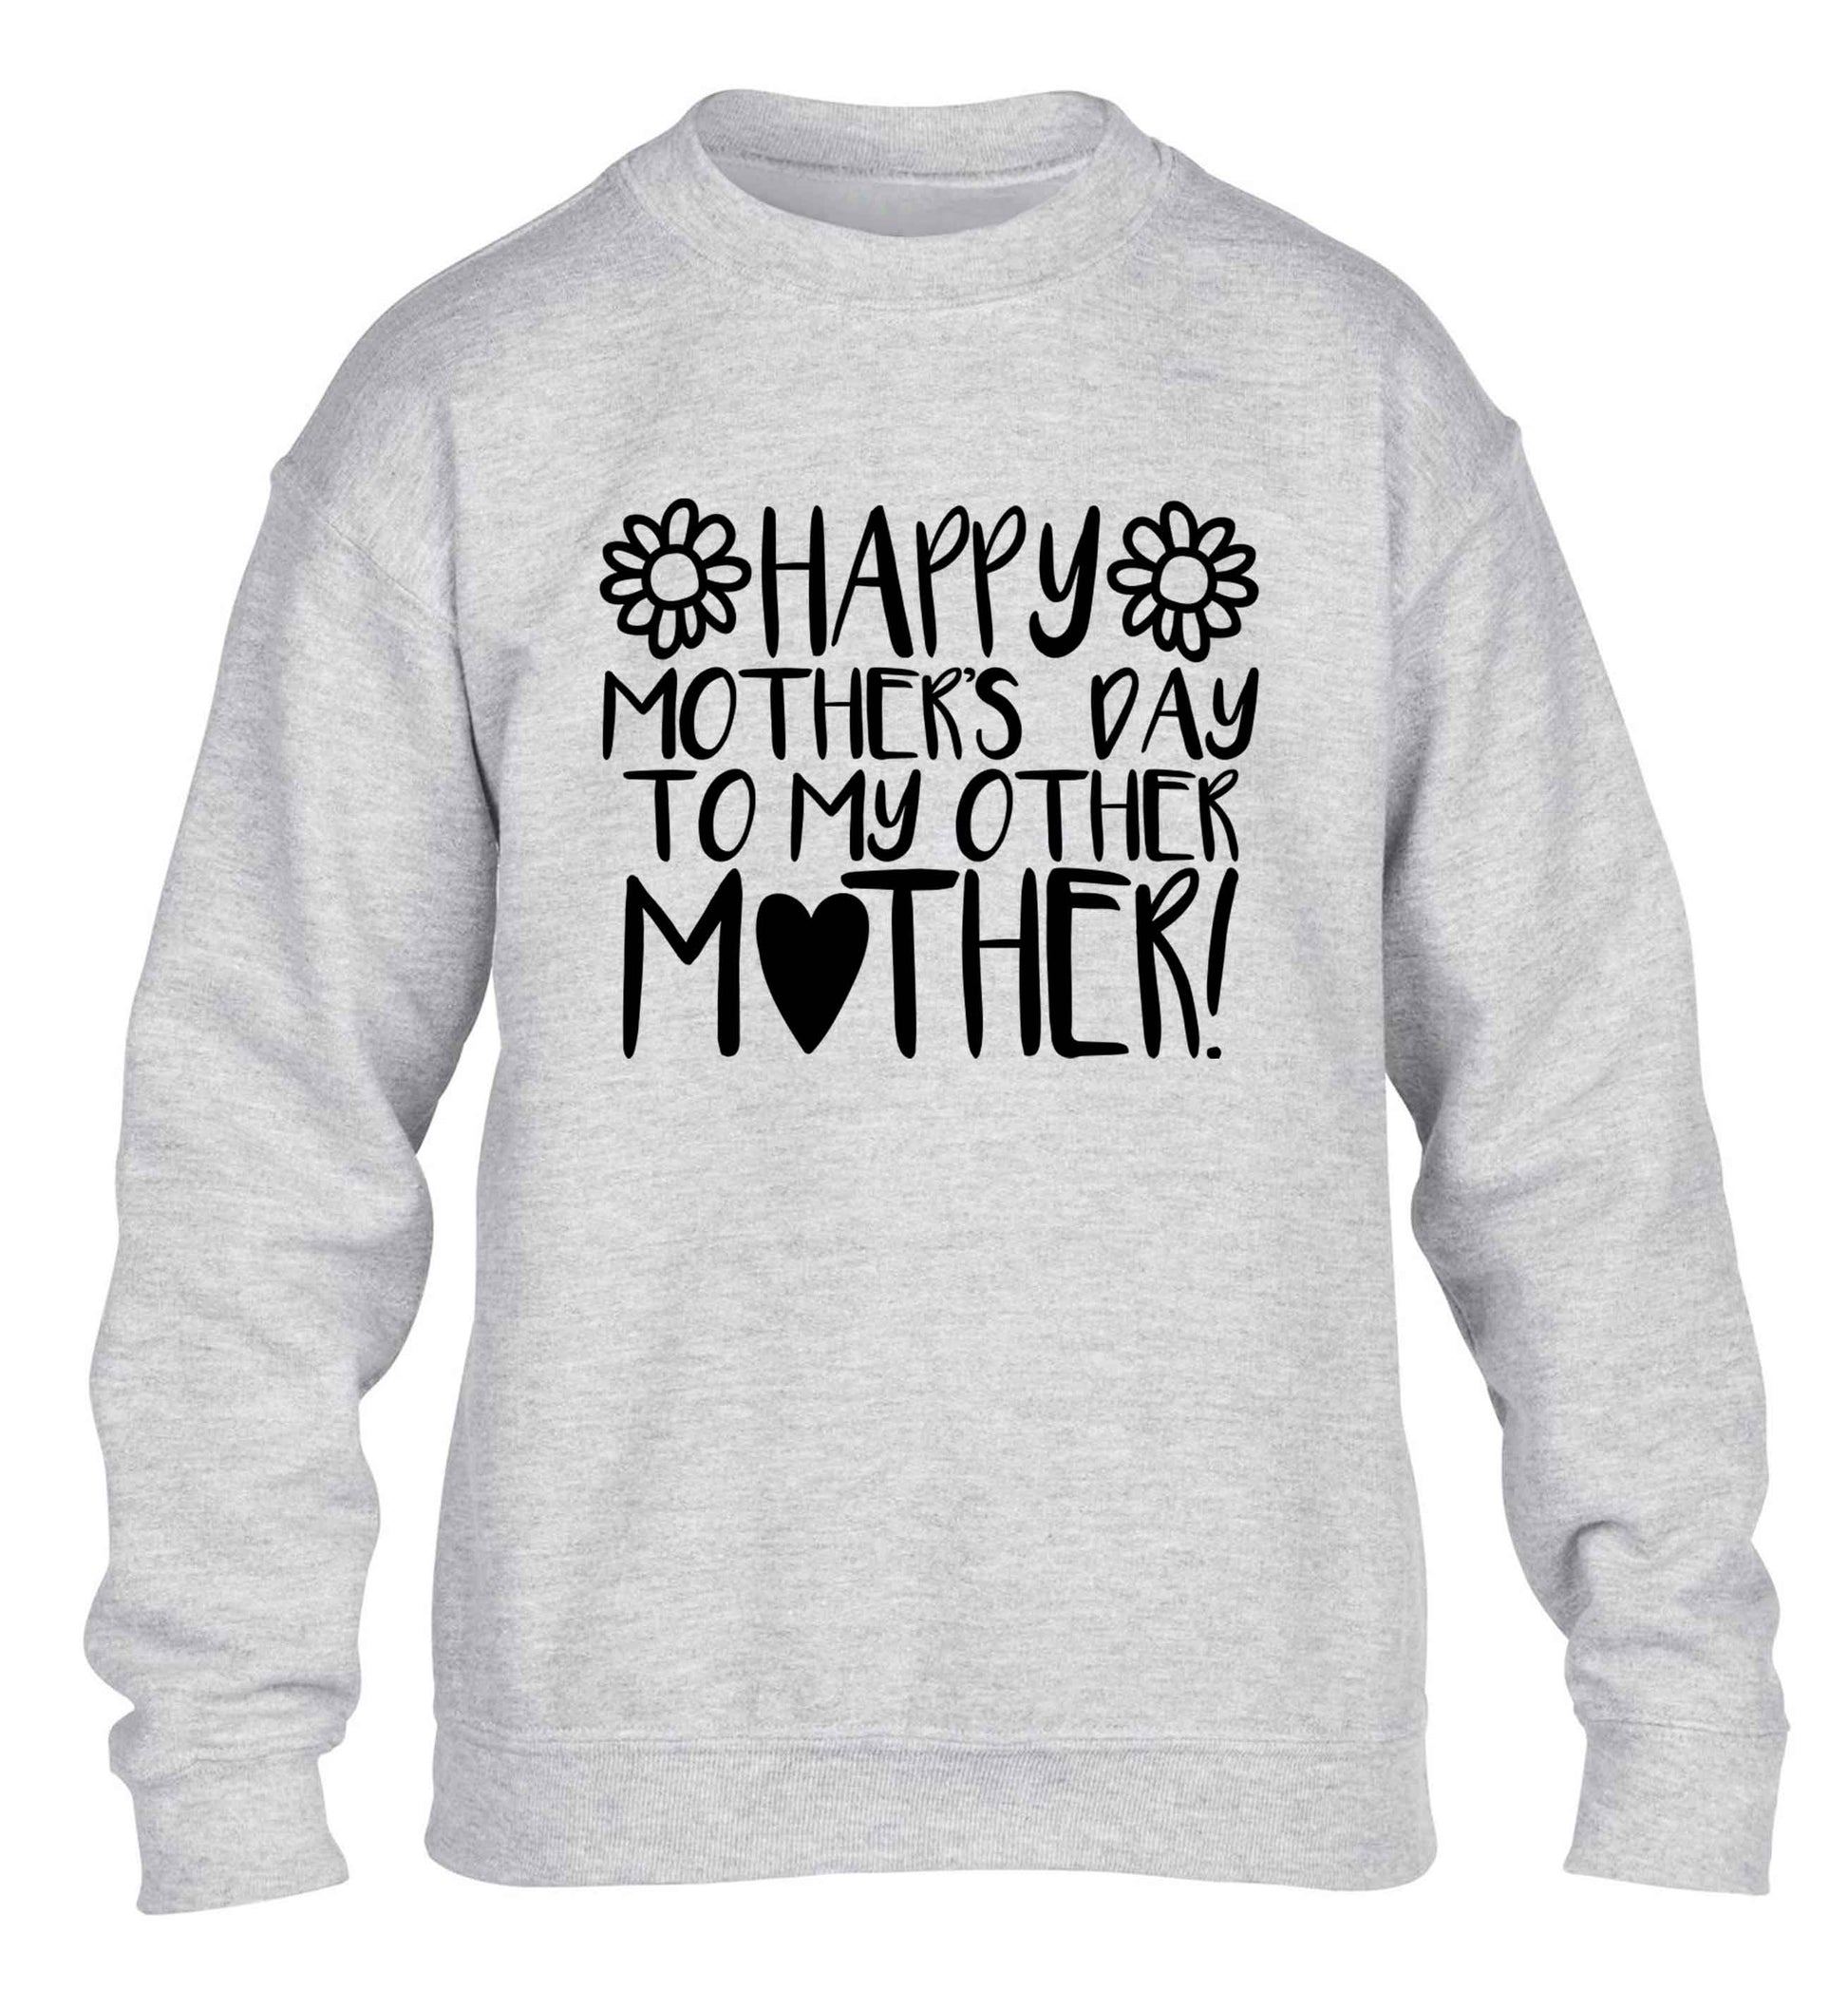 Happy mother's day to my other mother children's grey sweater 12-13 Years